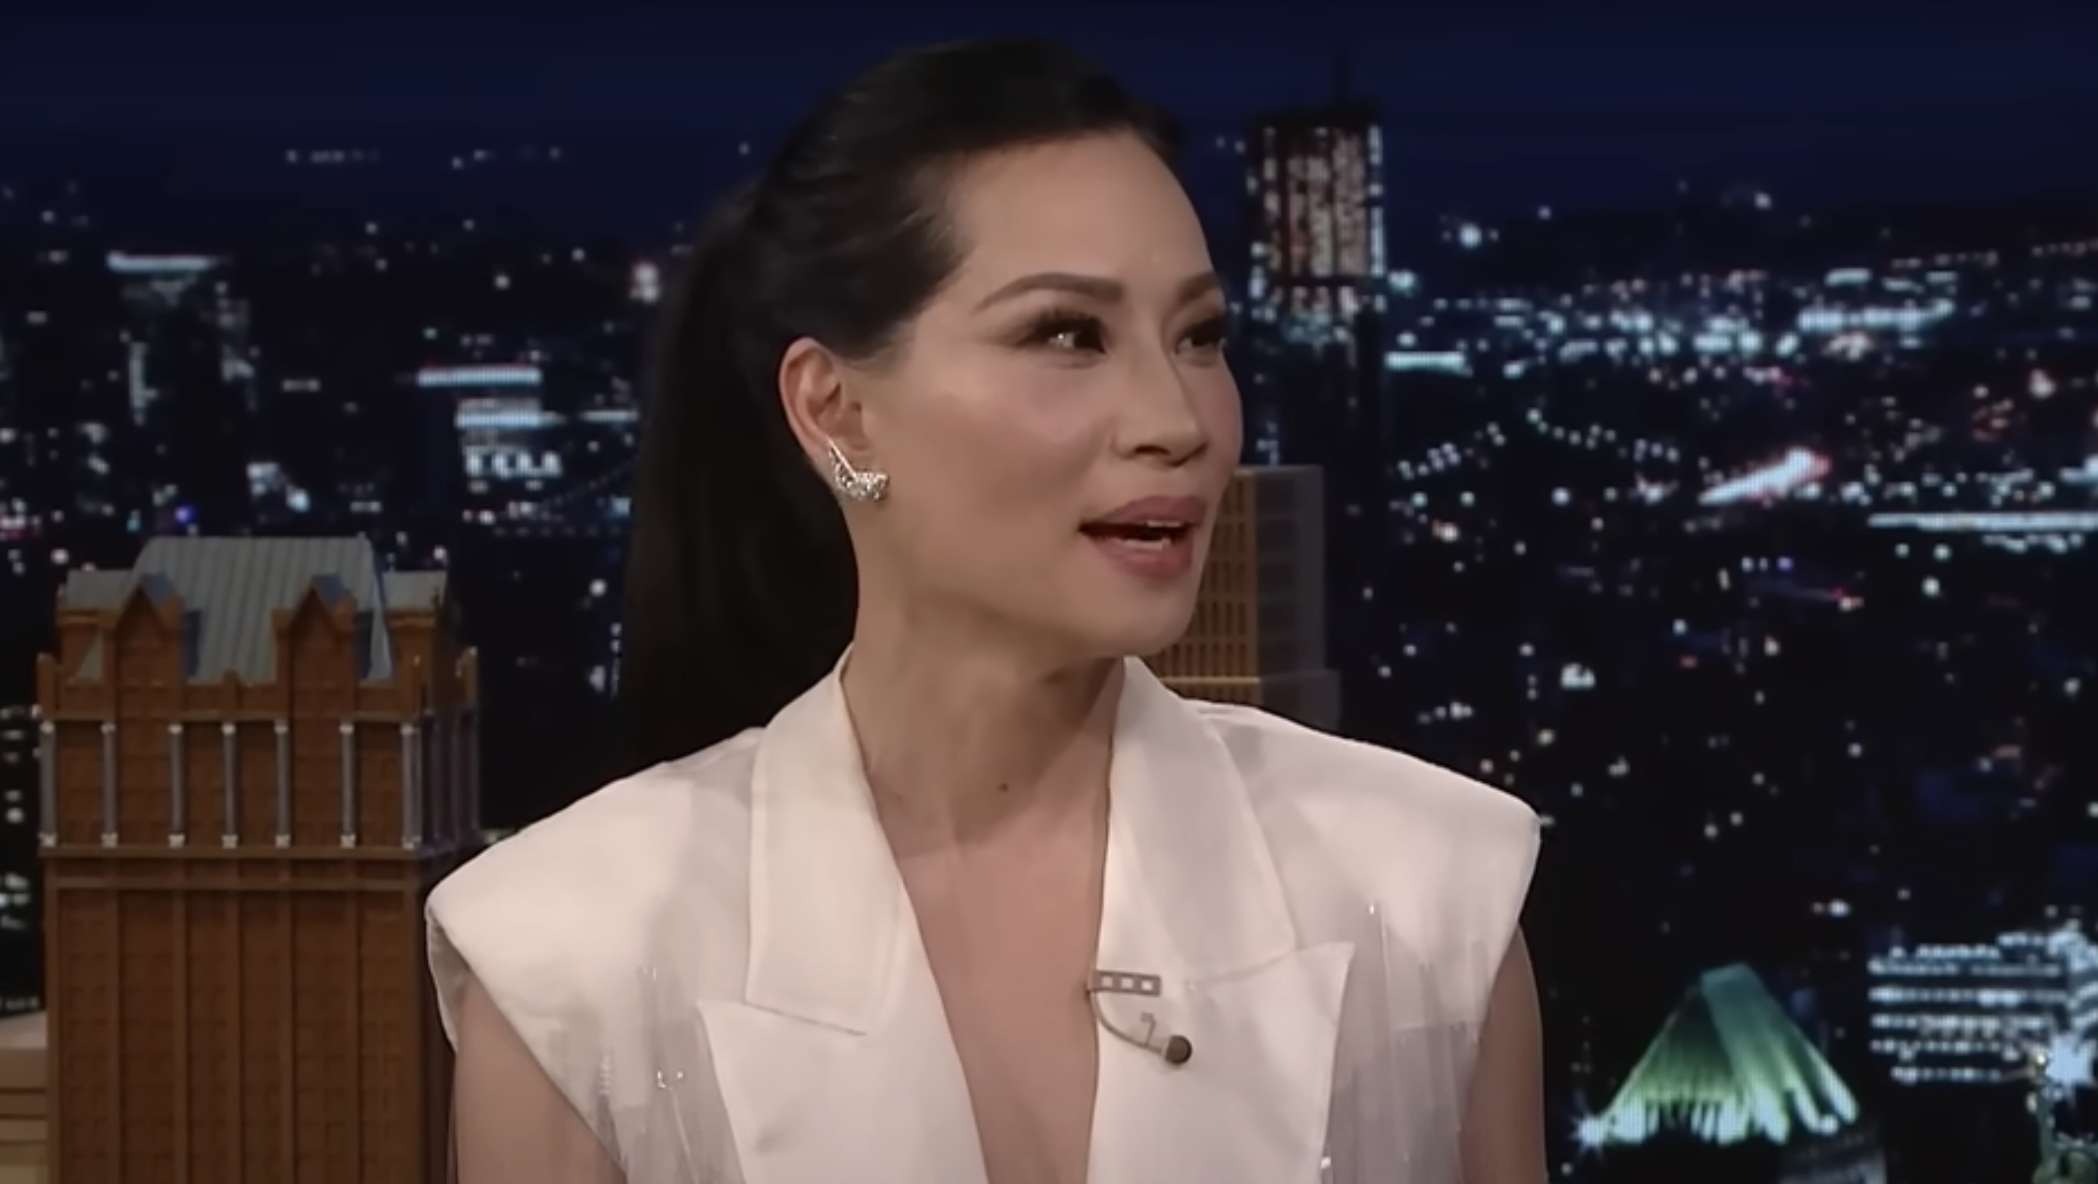 Woman on talk show wearing a v-neck layered lapel blouse, earrings, with cityscape background